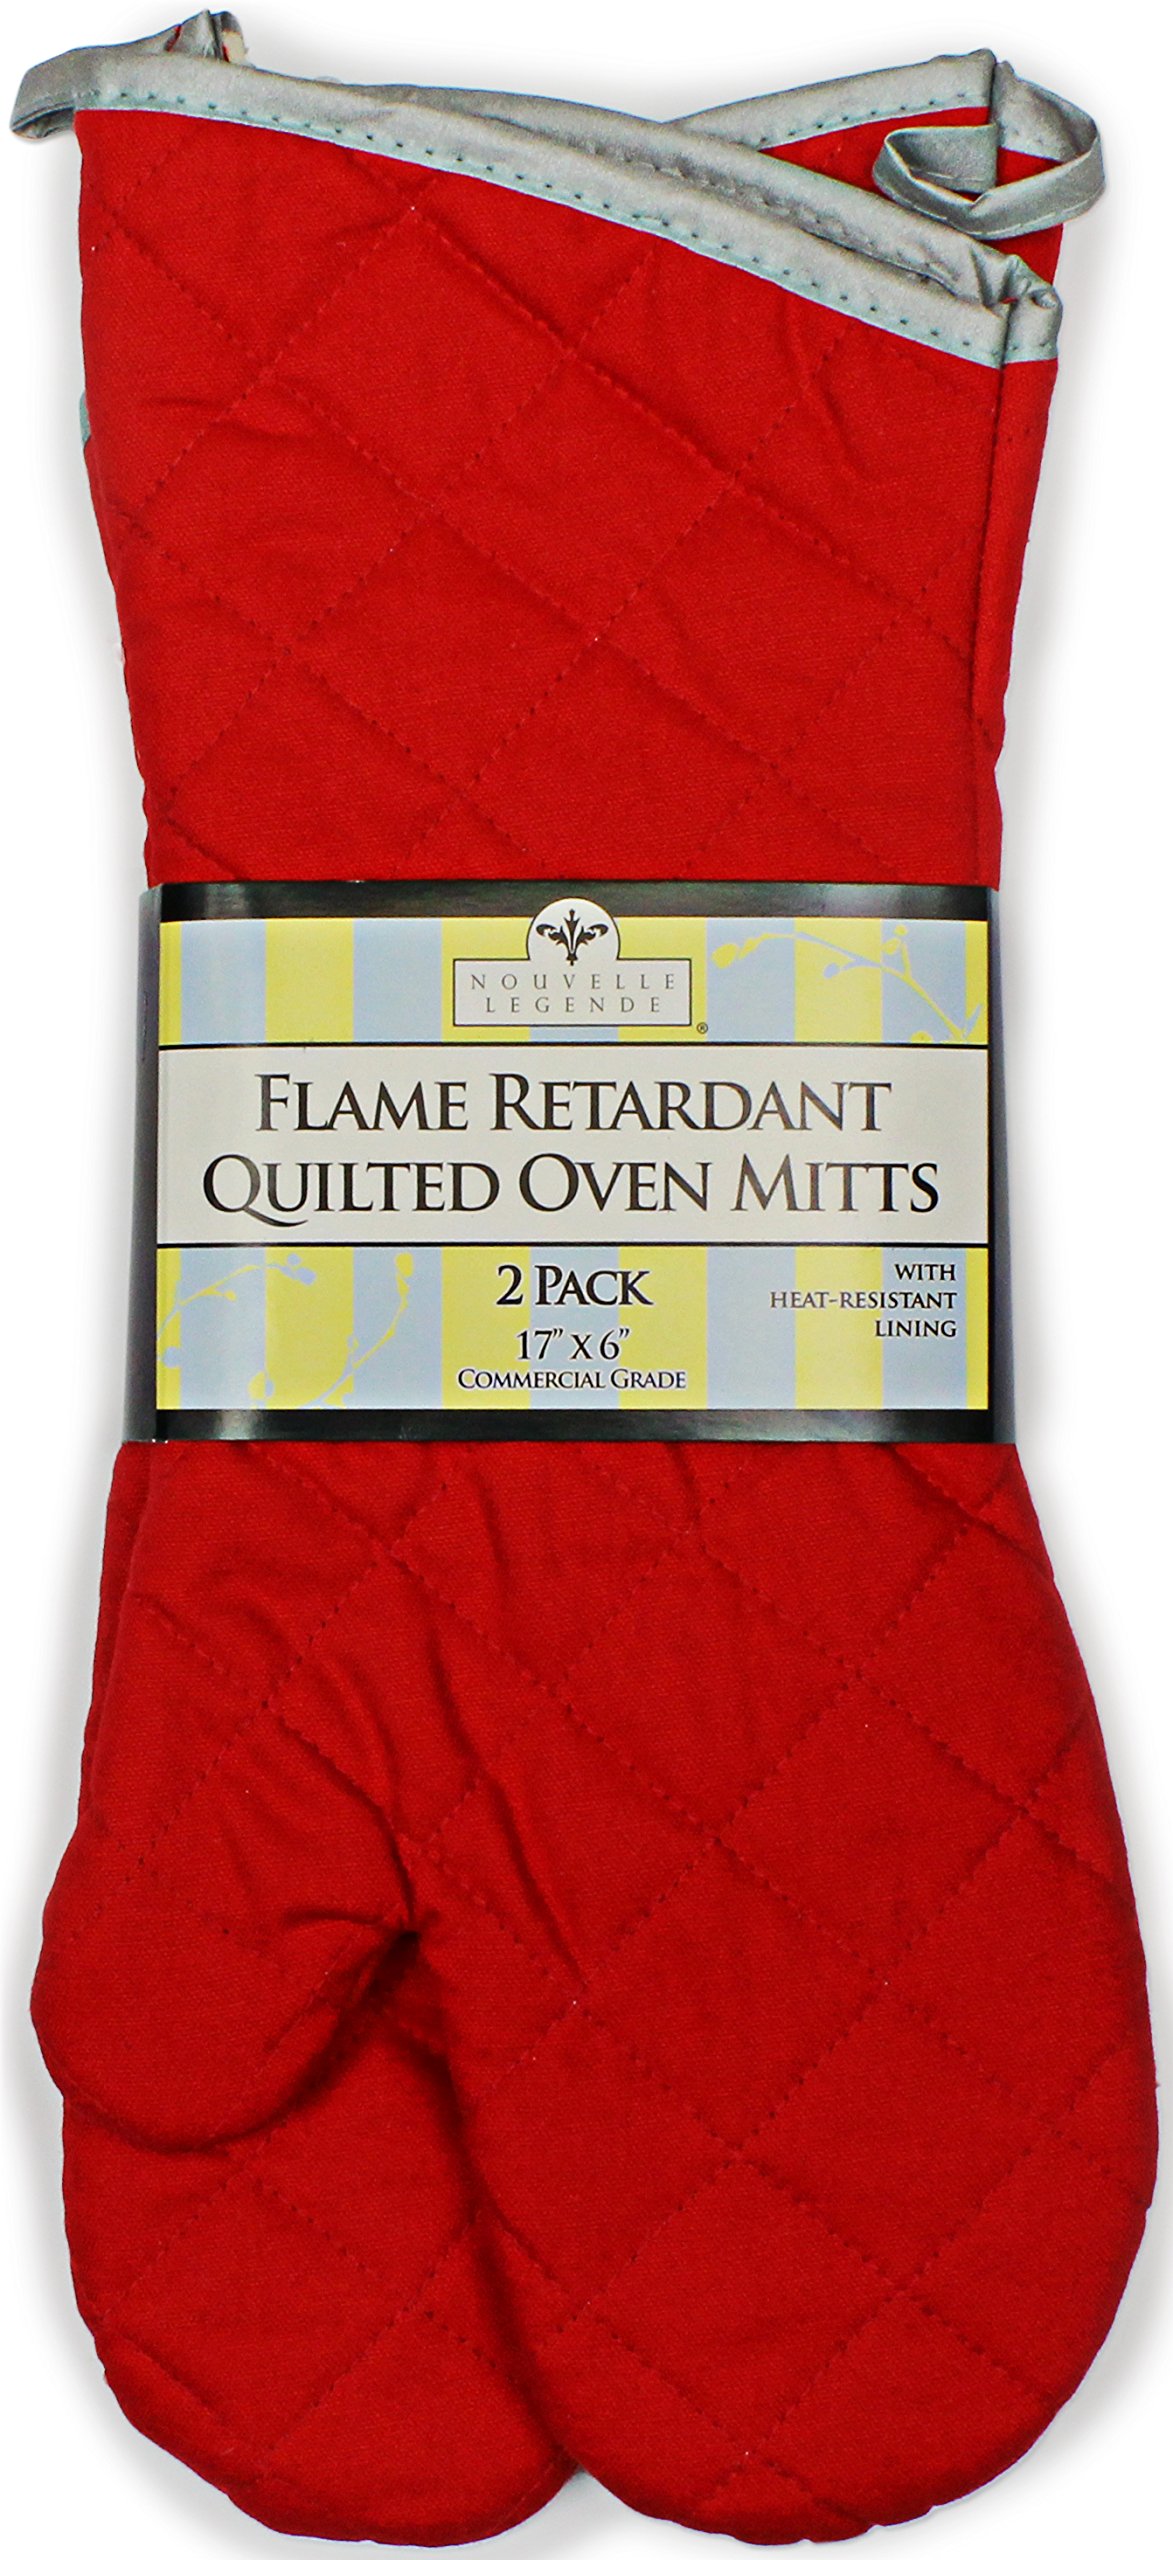 Nouvelle Legende Flame Retardant Kitchen and BBQ Heavy Duty Burn Protection Quilted Mitt, 17 Inches, Red, 2-Pack